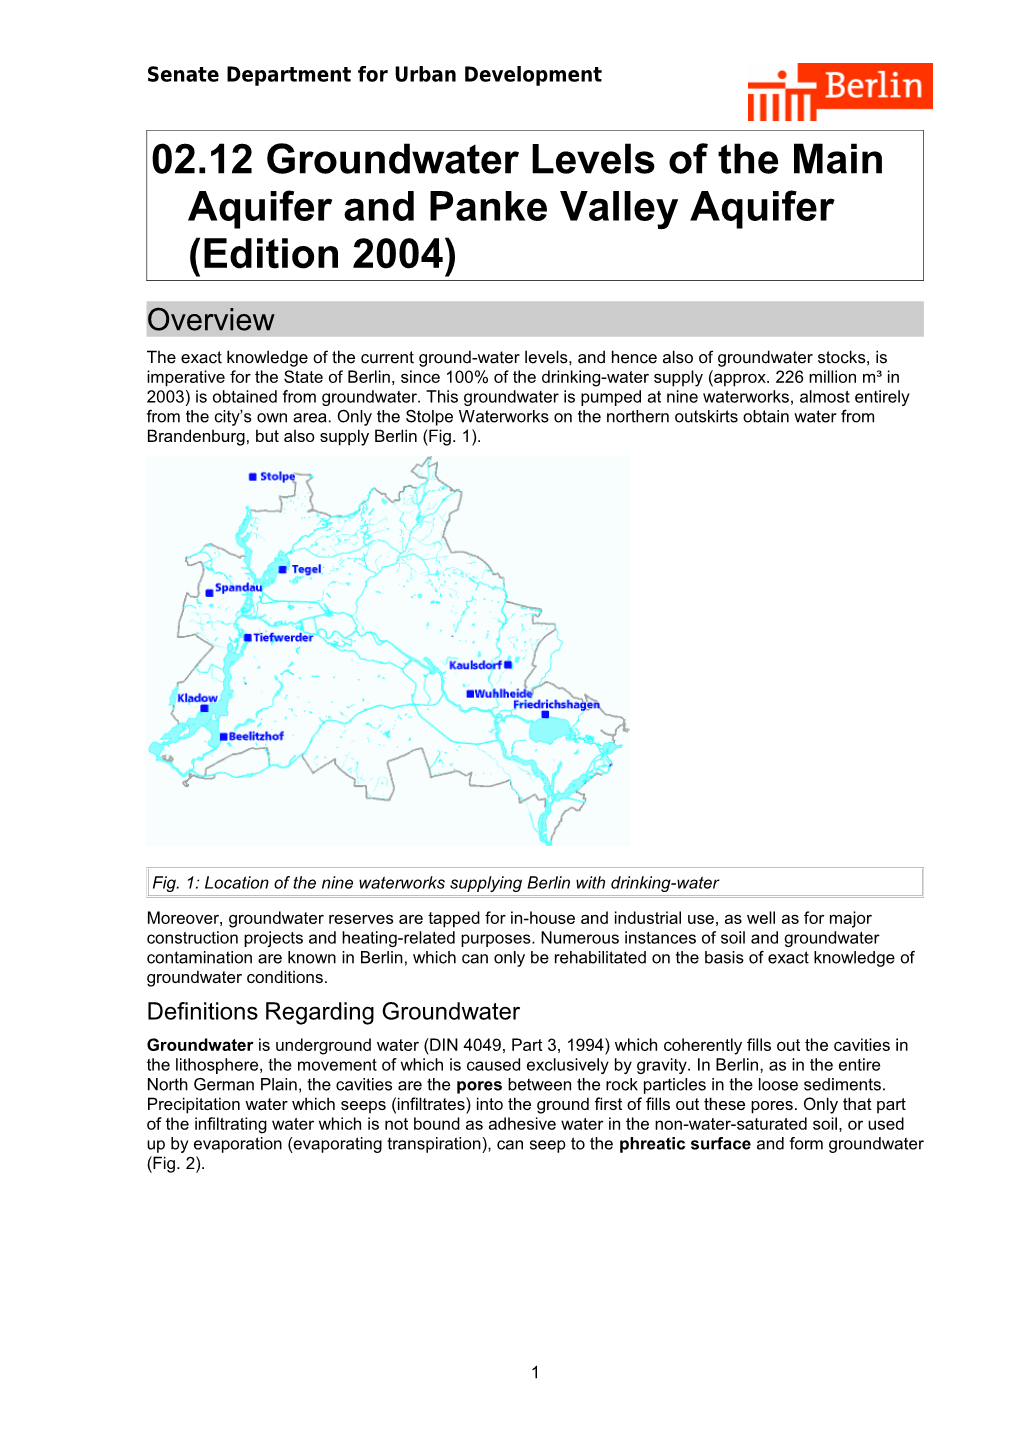 02.12 Groundwater Levels of the Main Aquifer and Panke Valley Aquifer (Edition 2004)